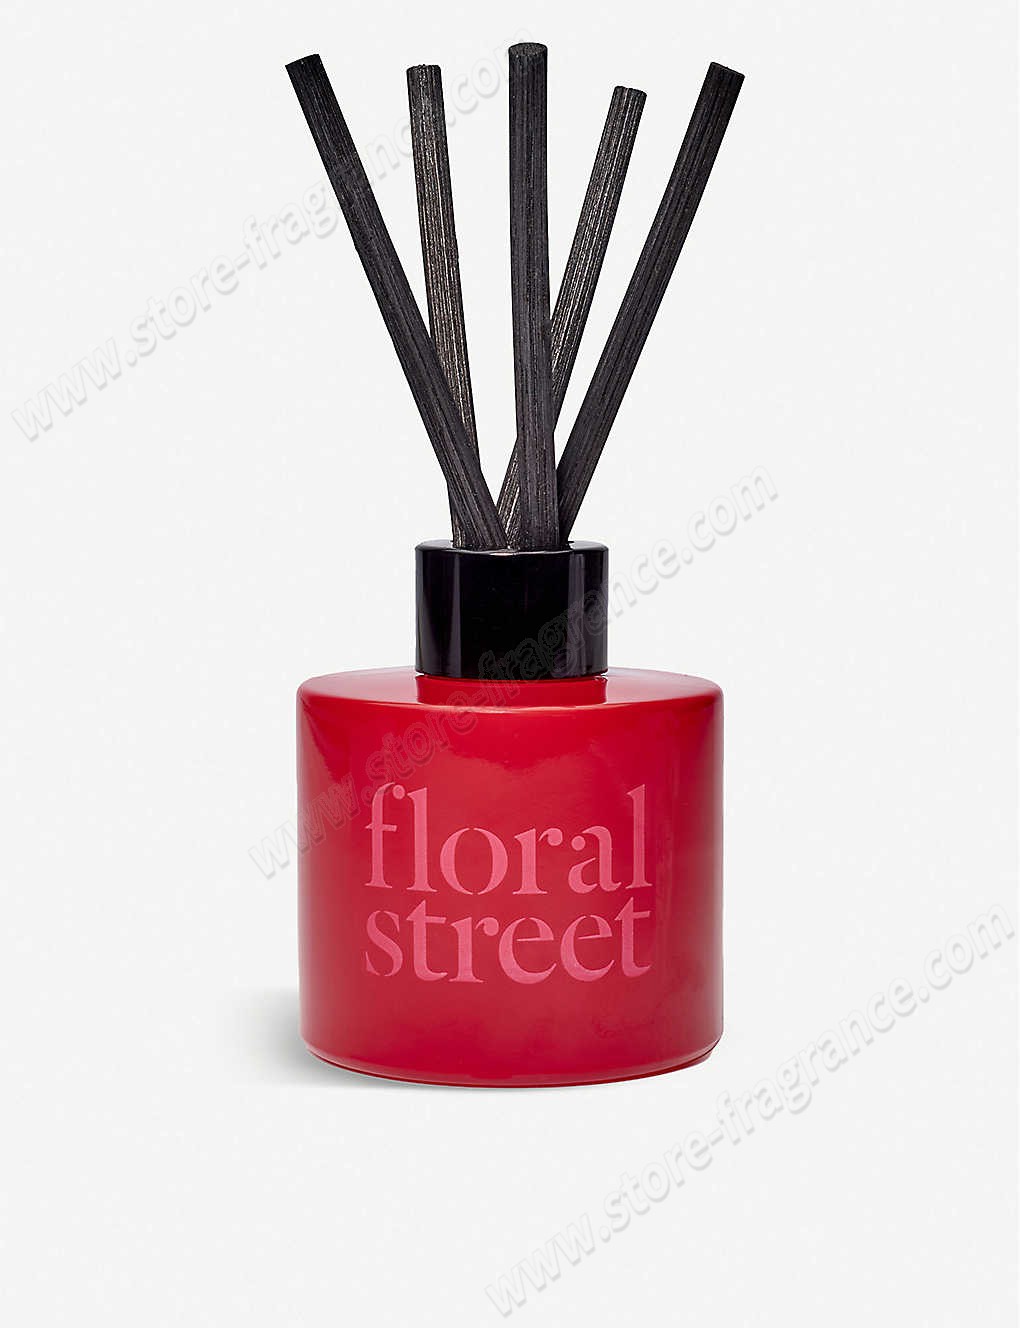 FLORAL STREET/Lipstick scented diffuser 100ml Limit Offer - -0